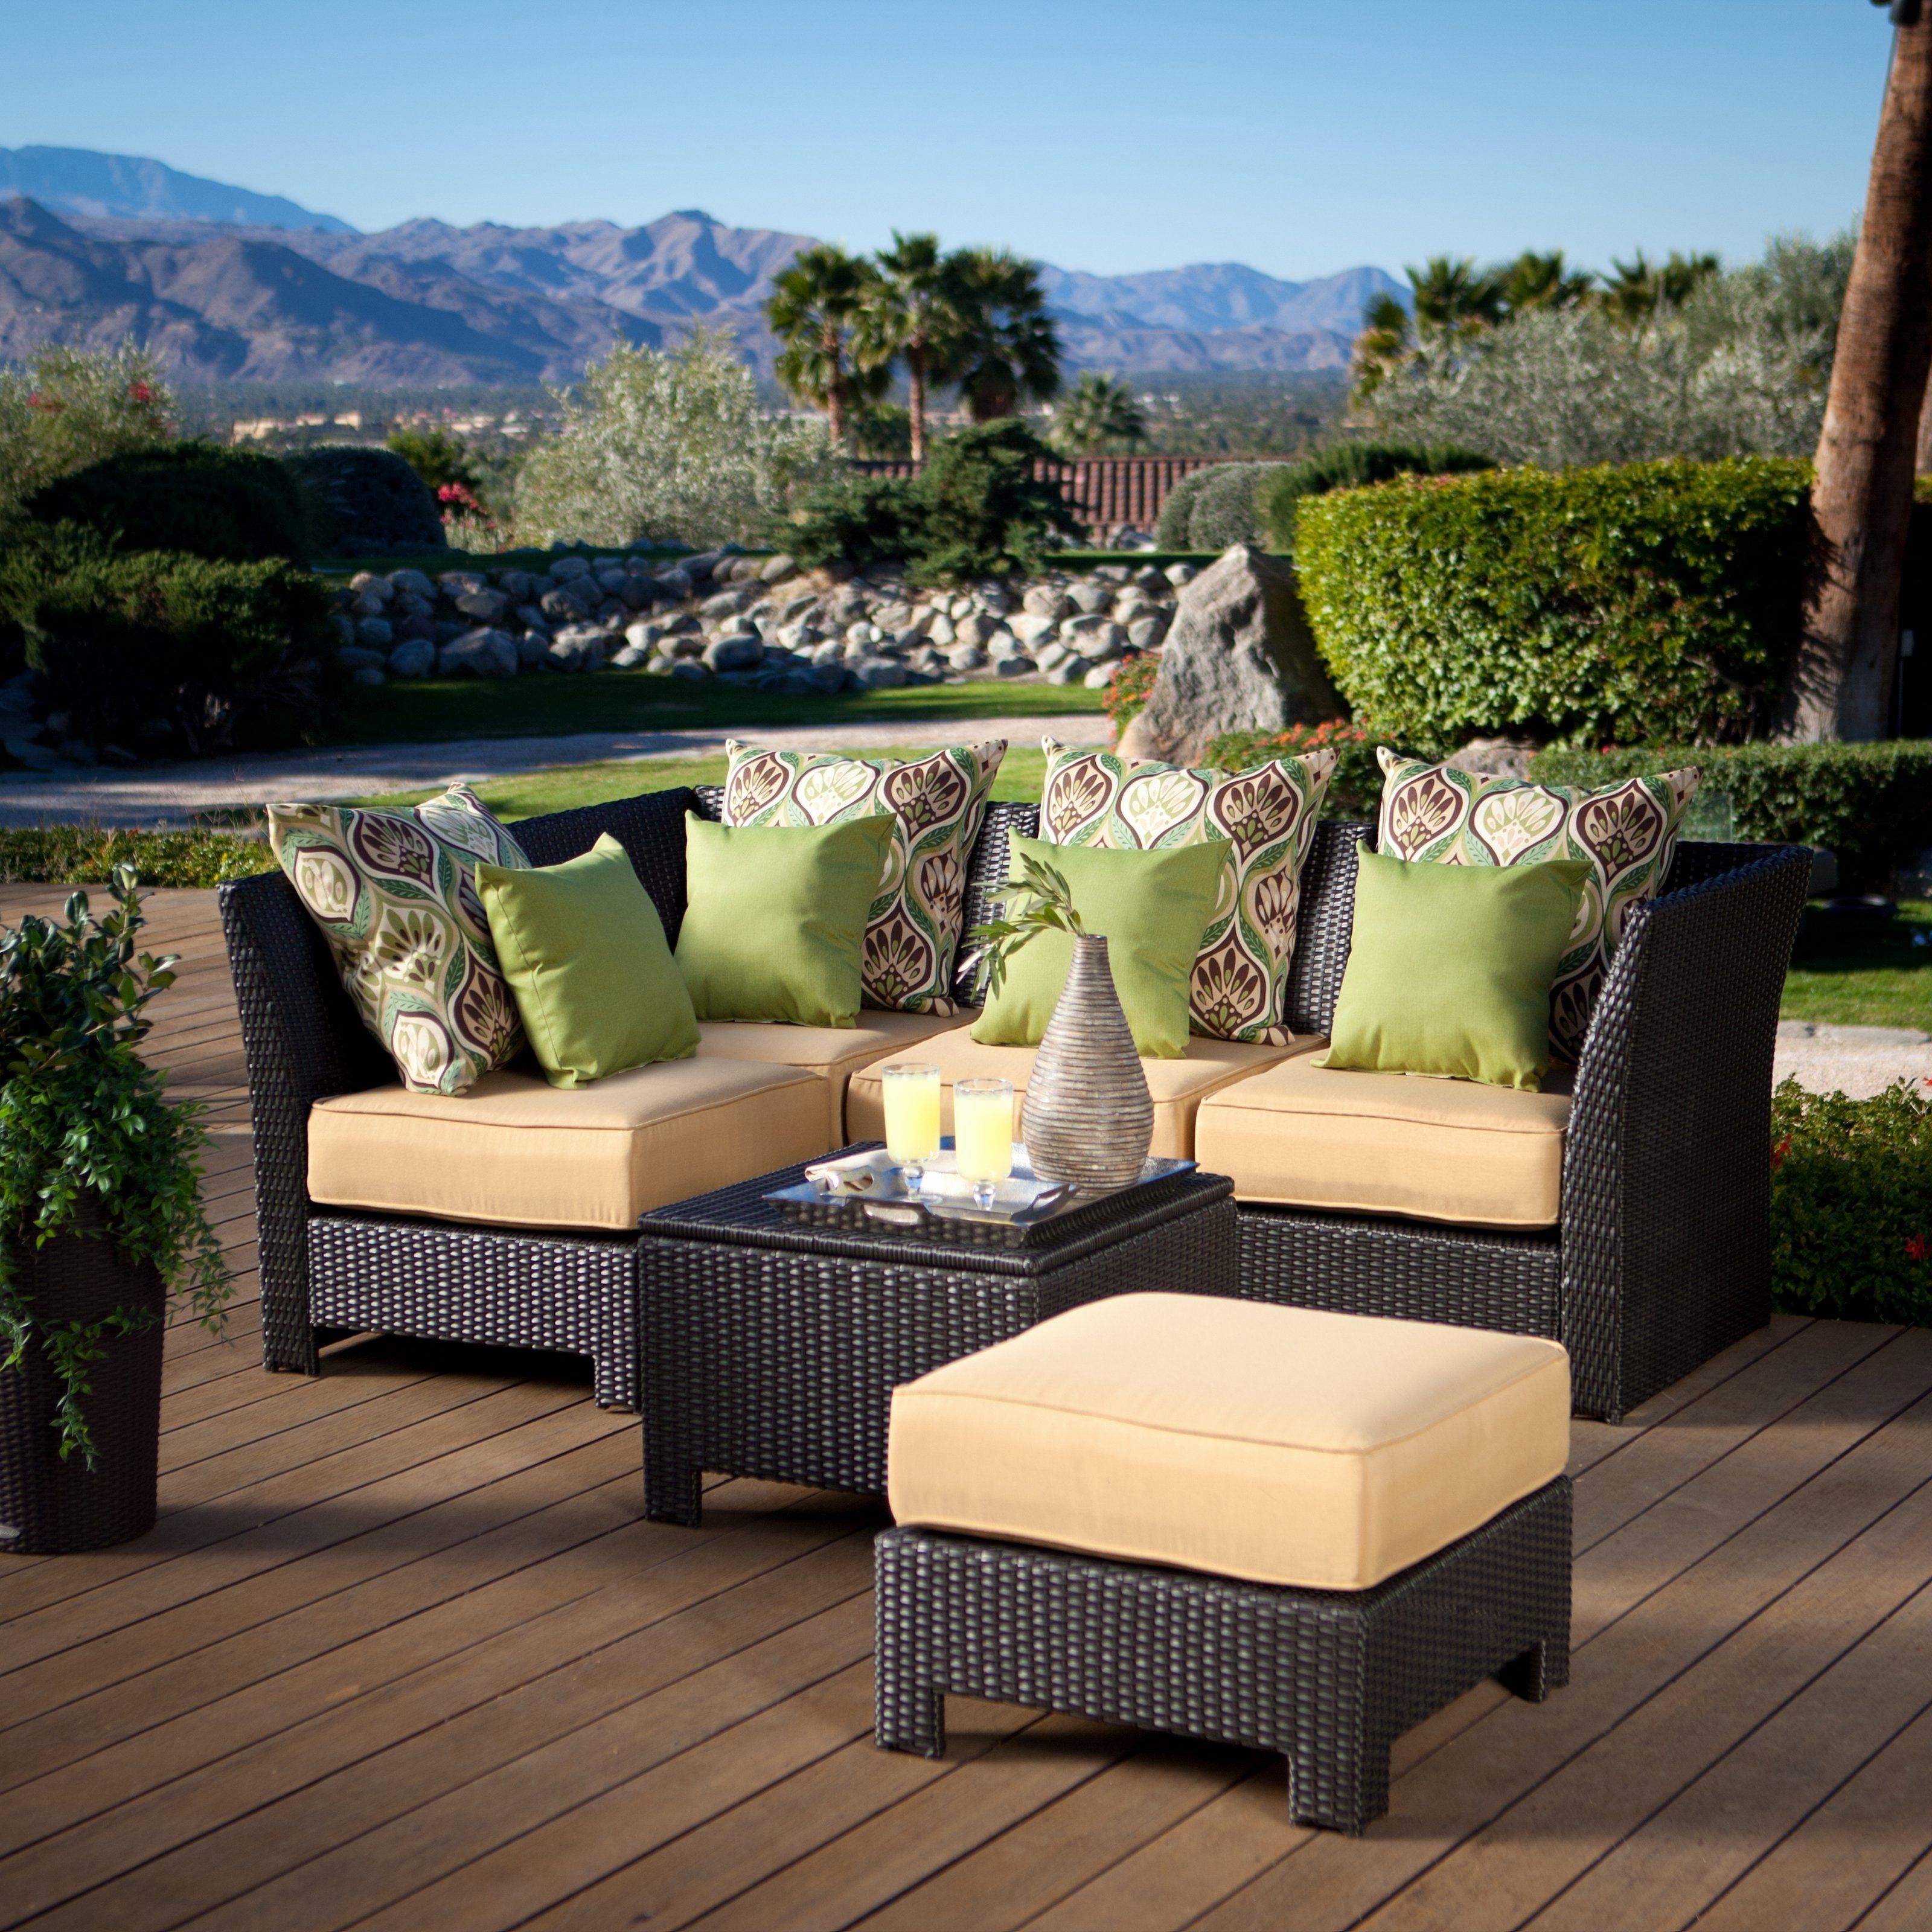 Target Conversation Patio Furniture – Furniture Ideas Inside Current Patio Conversation Sets At Target (View 15 of 20)